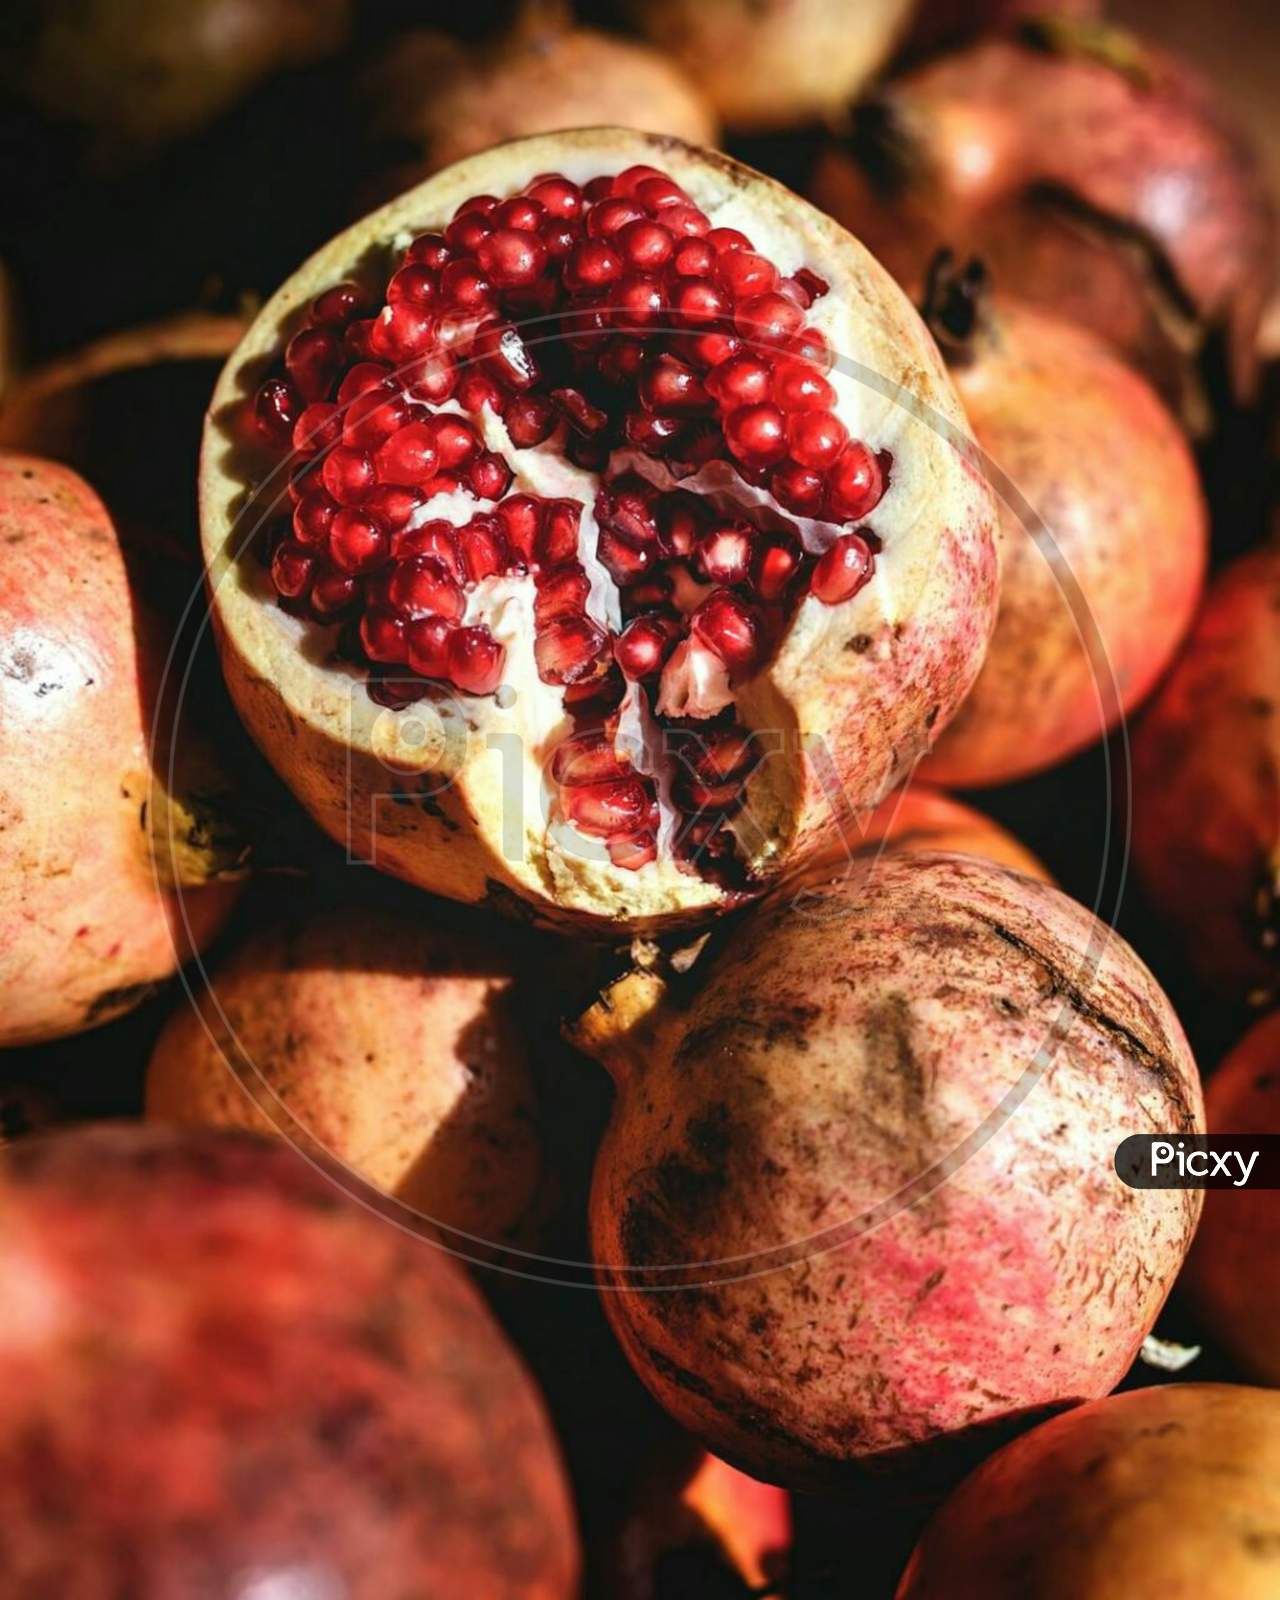 Pomegranate with natural red colour